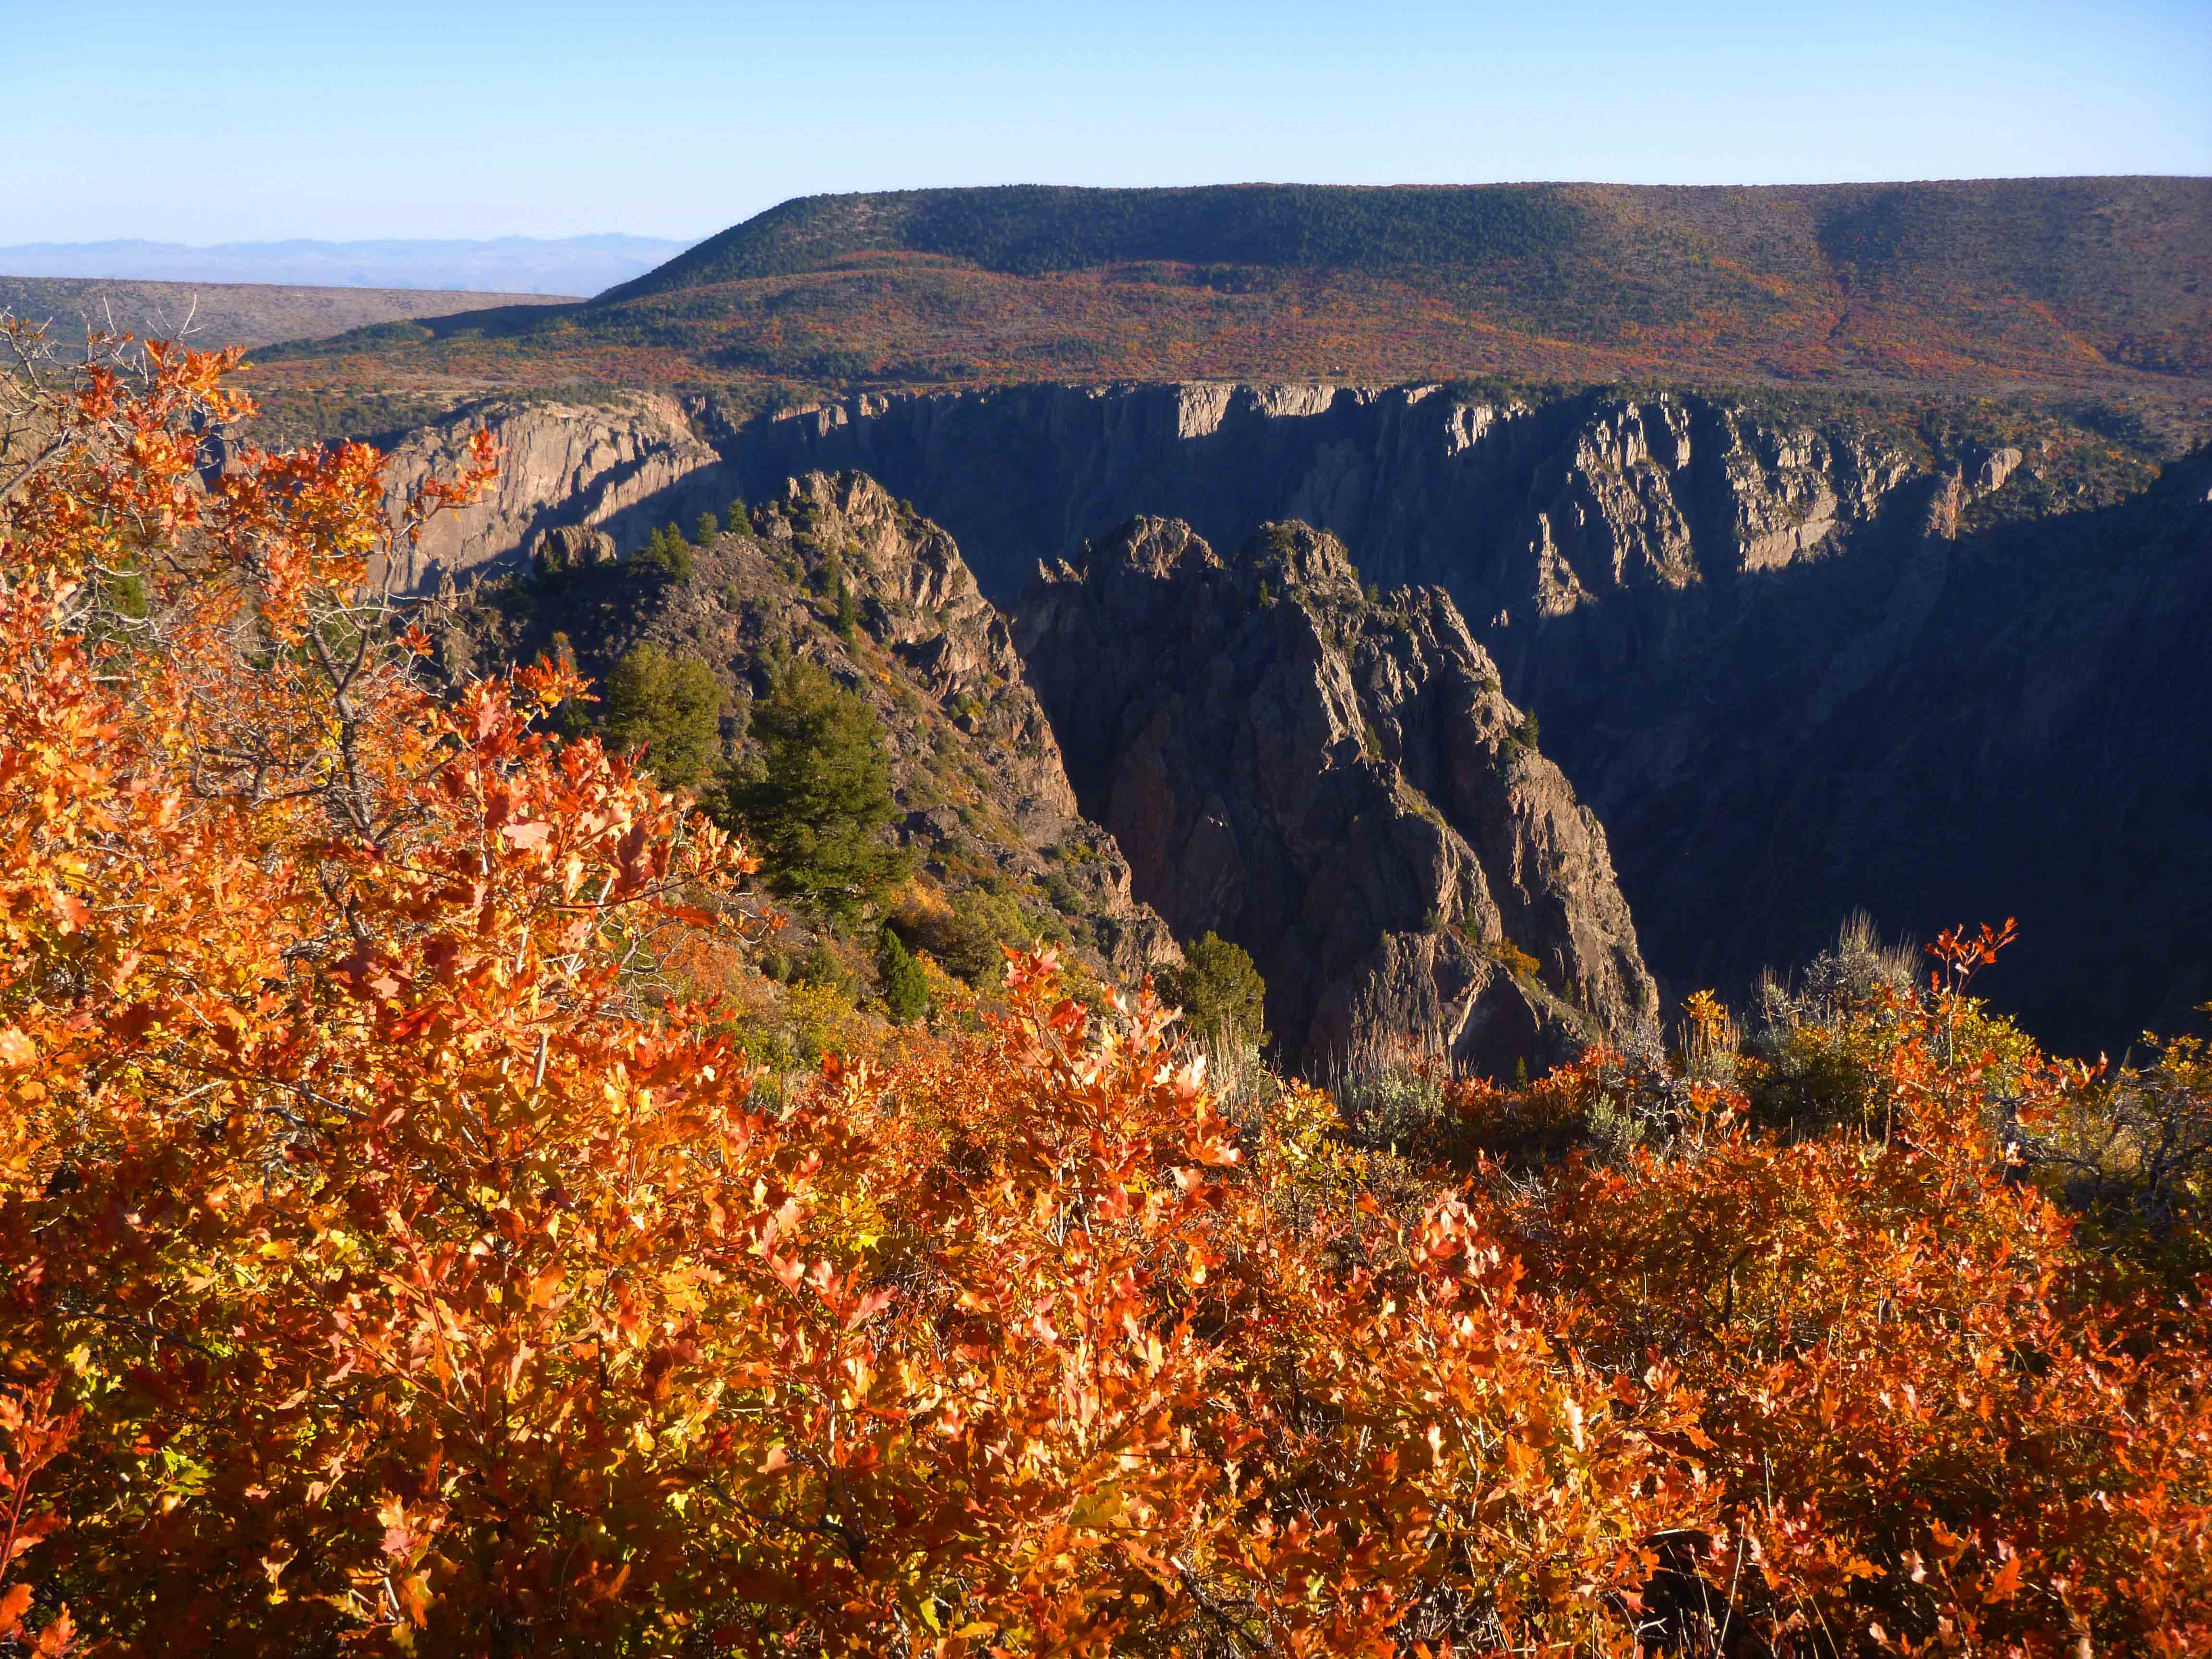 Brilliant yellow leaves of Gamble Oak in foreground with deep, dark canyon in mid ground, distant rim is splotched with fall color